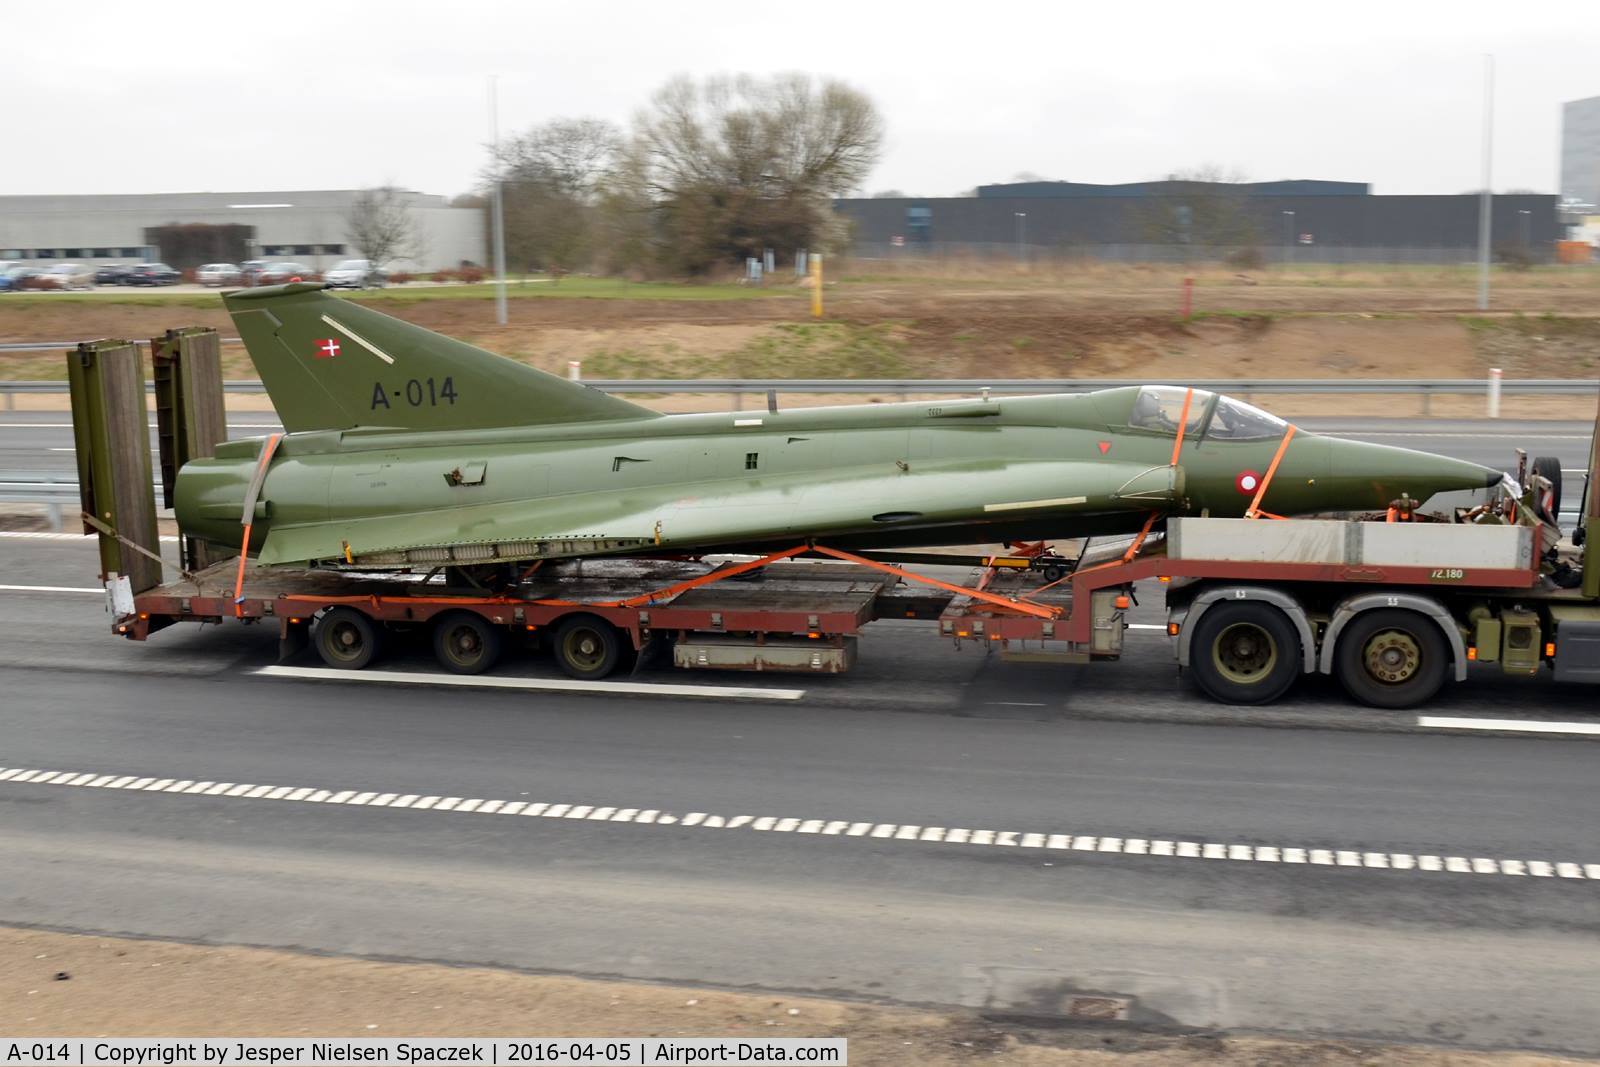 A-014, 1971 Saab F-35 Draken C/N 35-1014, On the road. A-014 spottet driving by Danish city Odense. Remark the 